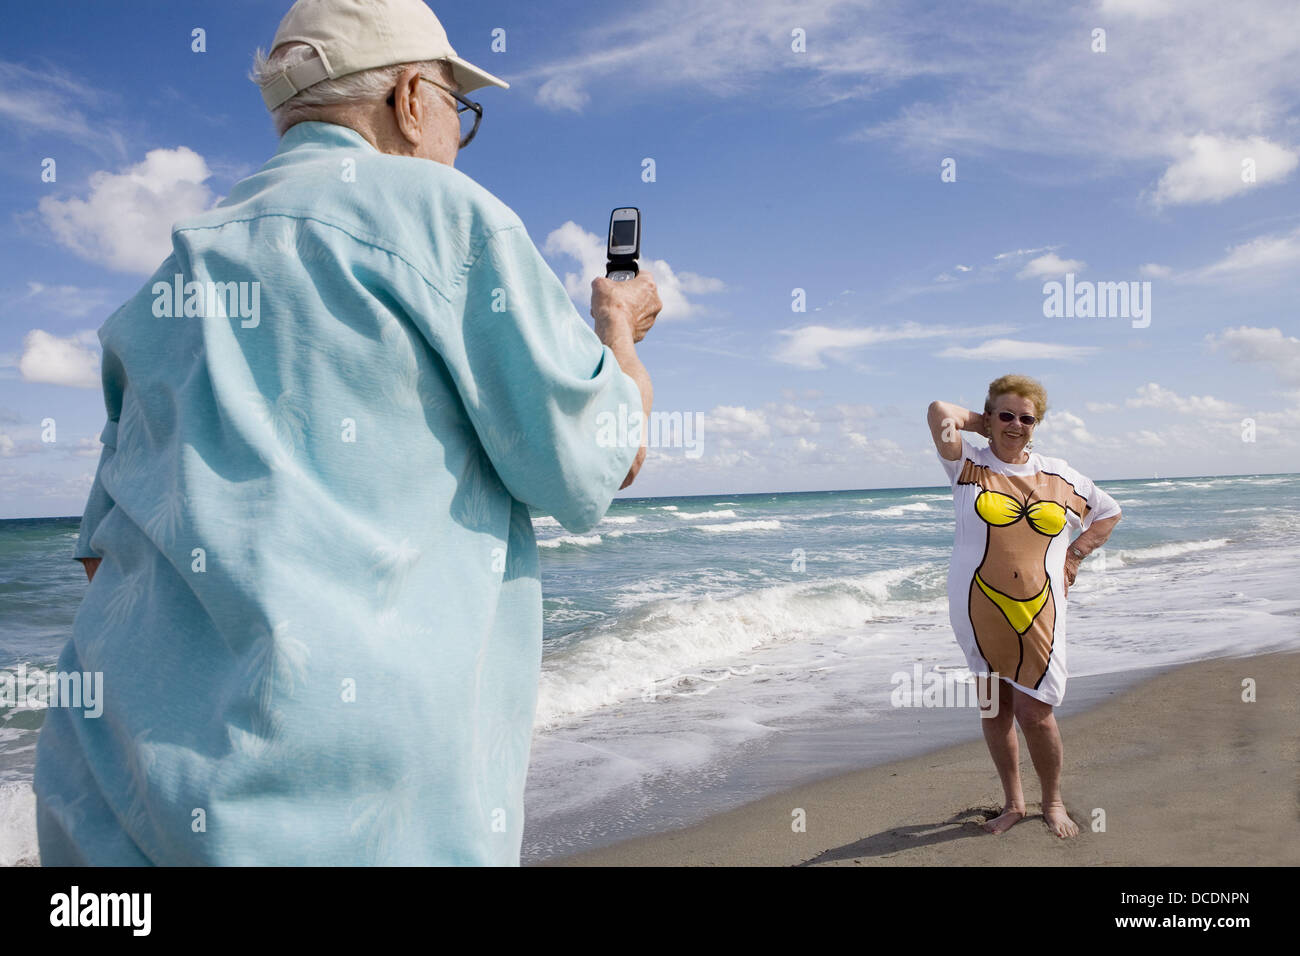 Taking picture of wife in humorous tee shirt at beach Stock Photo